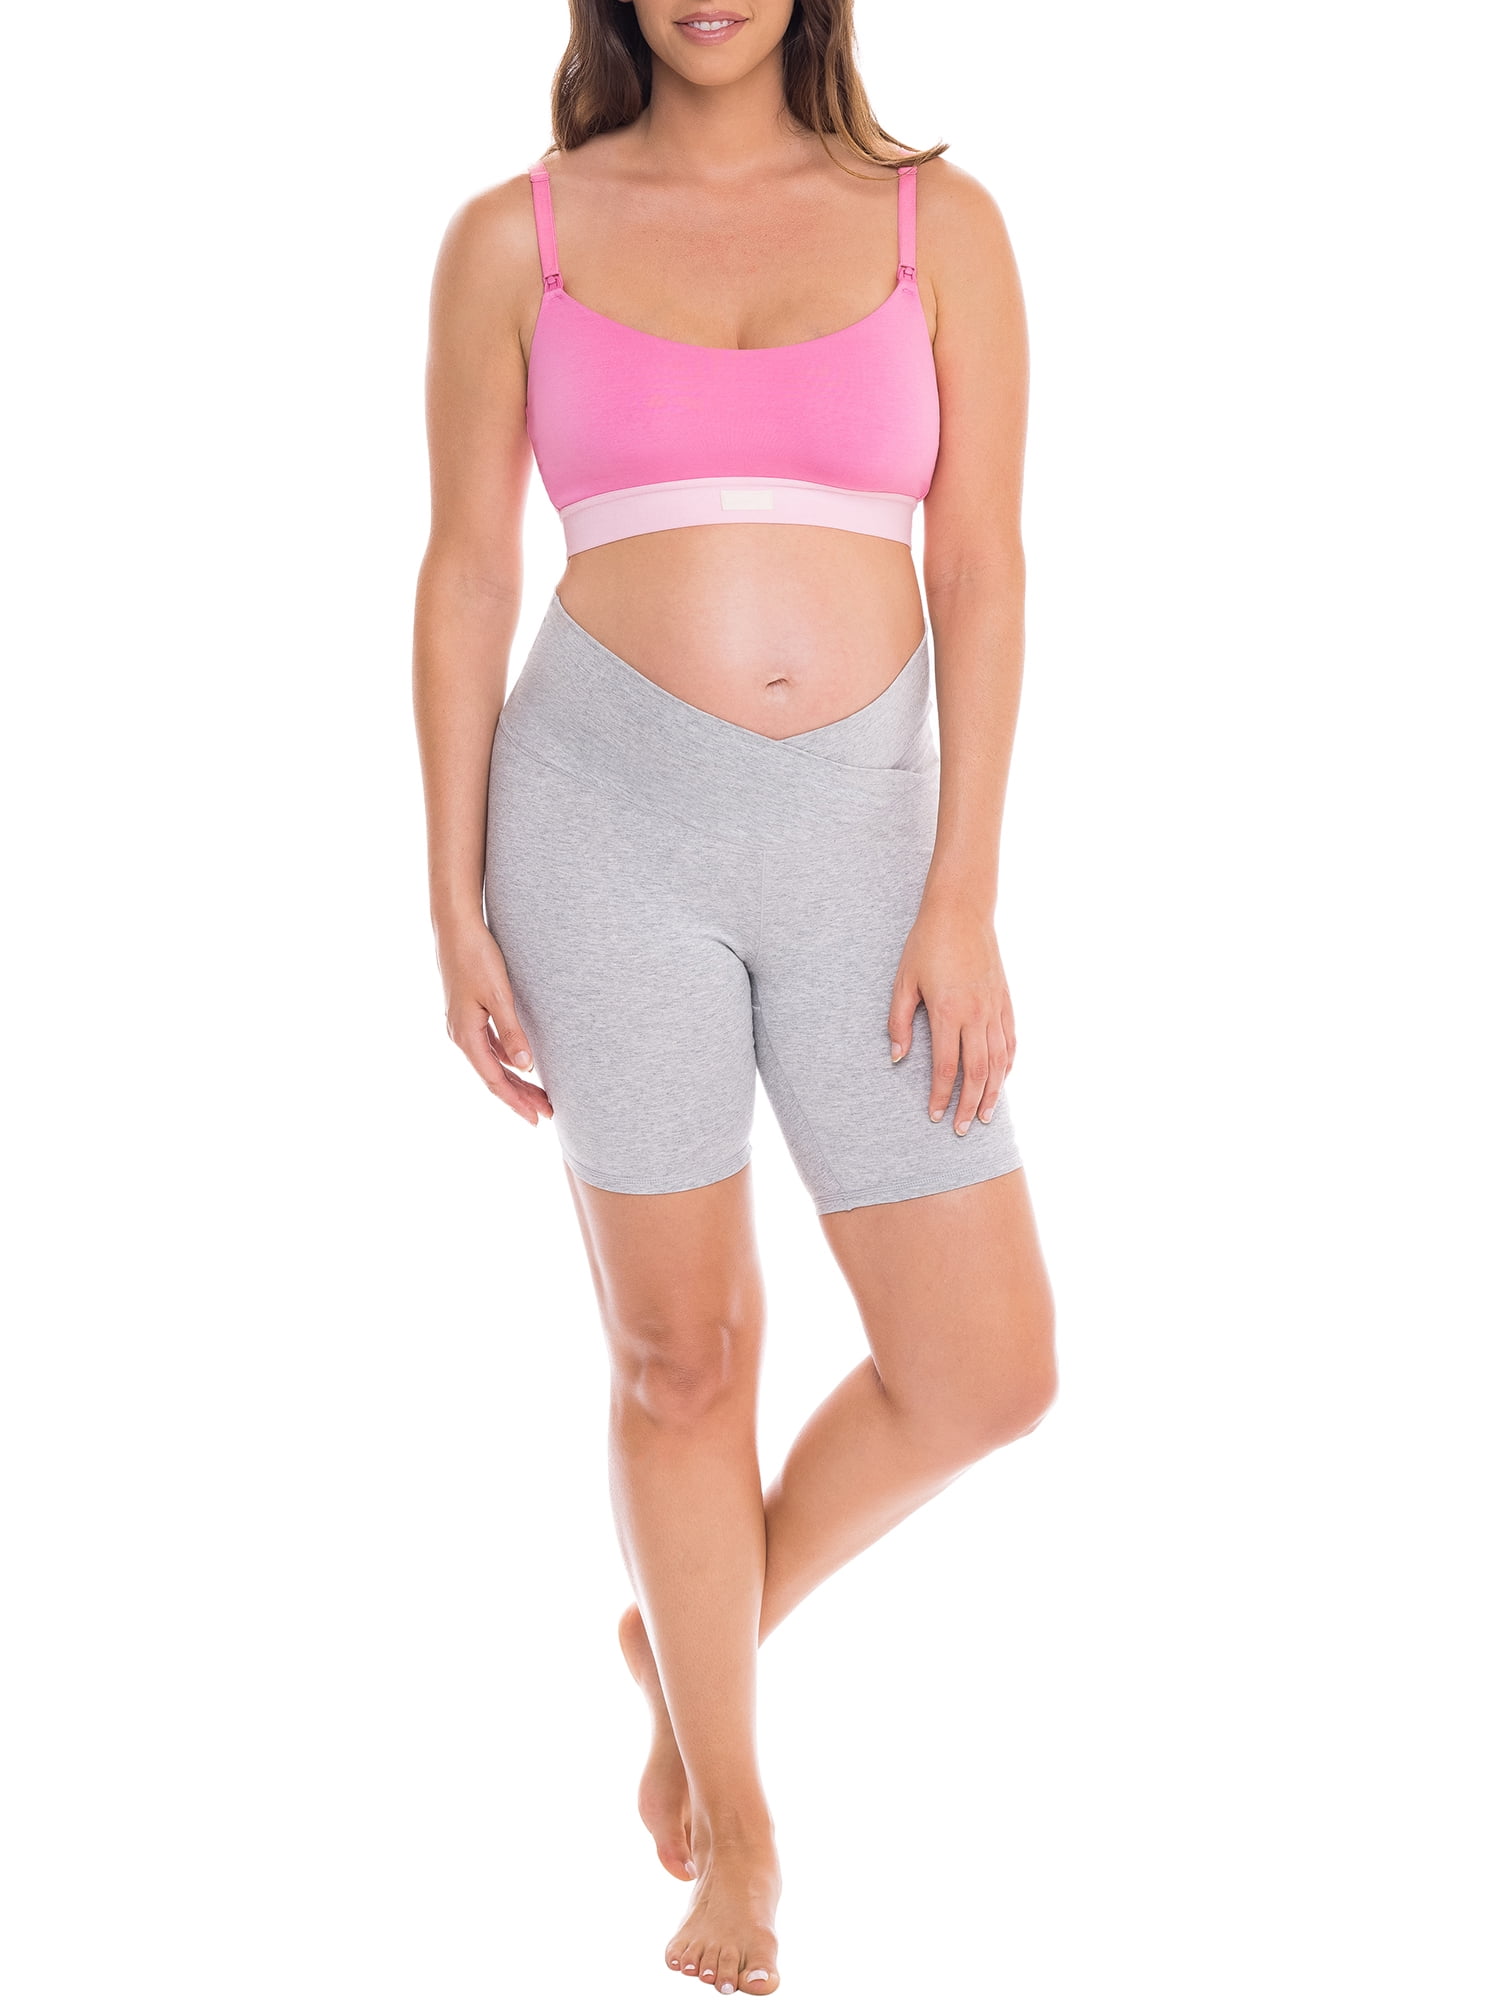 aaira_shapewear Maternity loungewear @650 BURN OUT 100% knitted soft cotton  Available in size S, M, L,XL ✨ most comfortable and